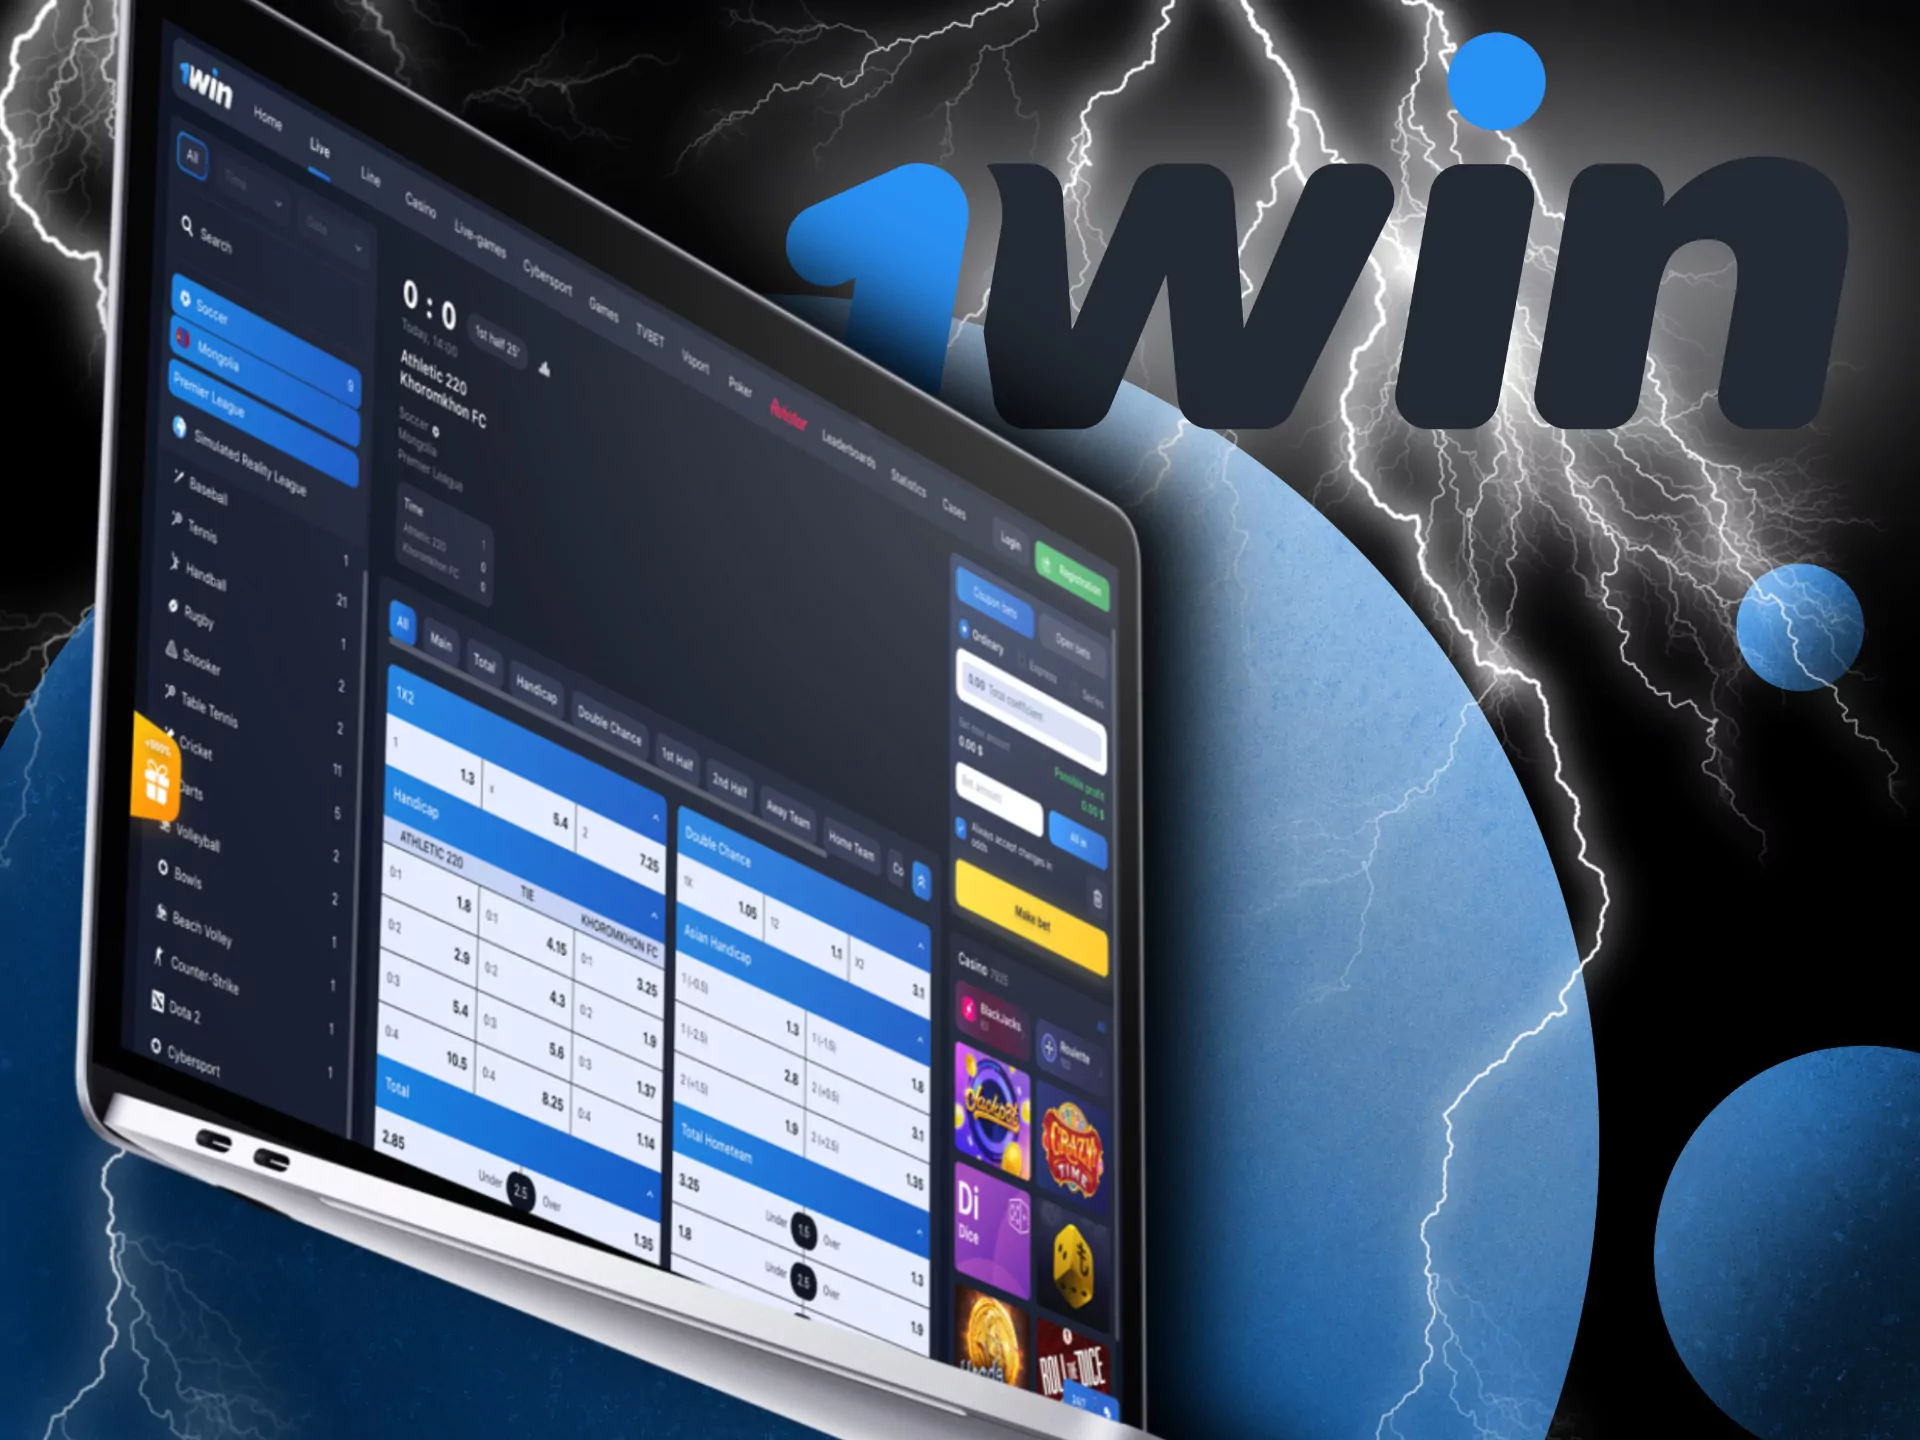 1Win has beautiful graphics and a user-friendly interface that is very comfortable in online betting.